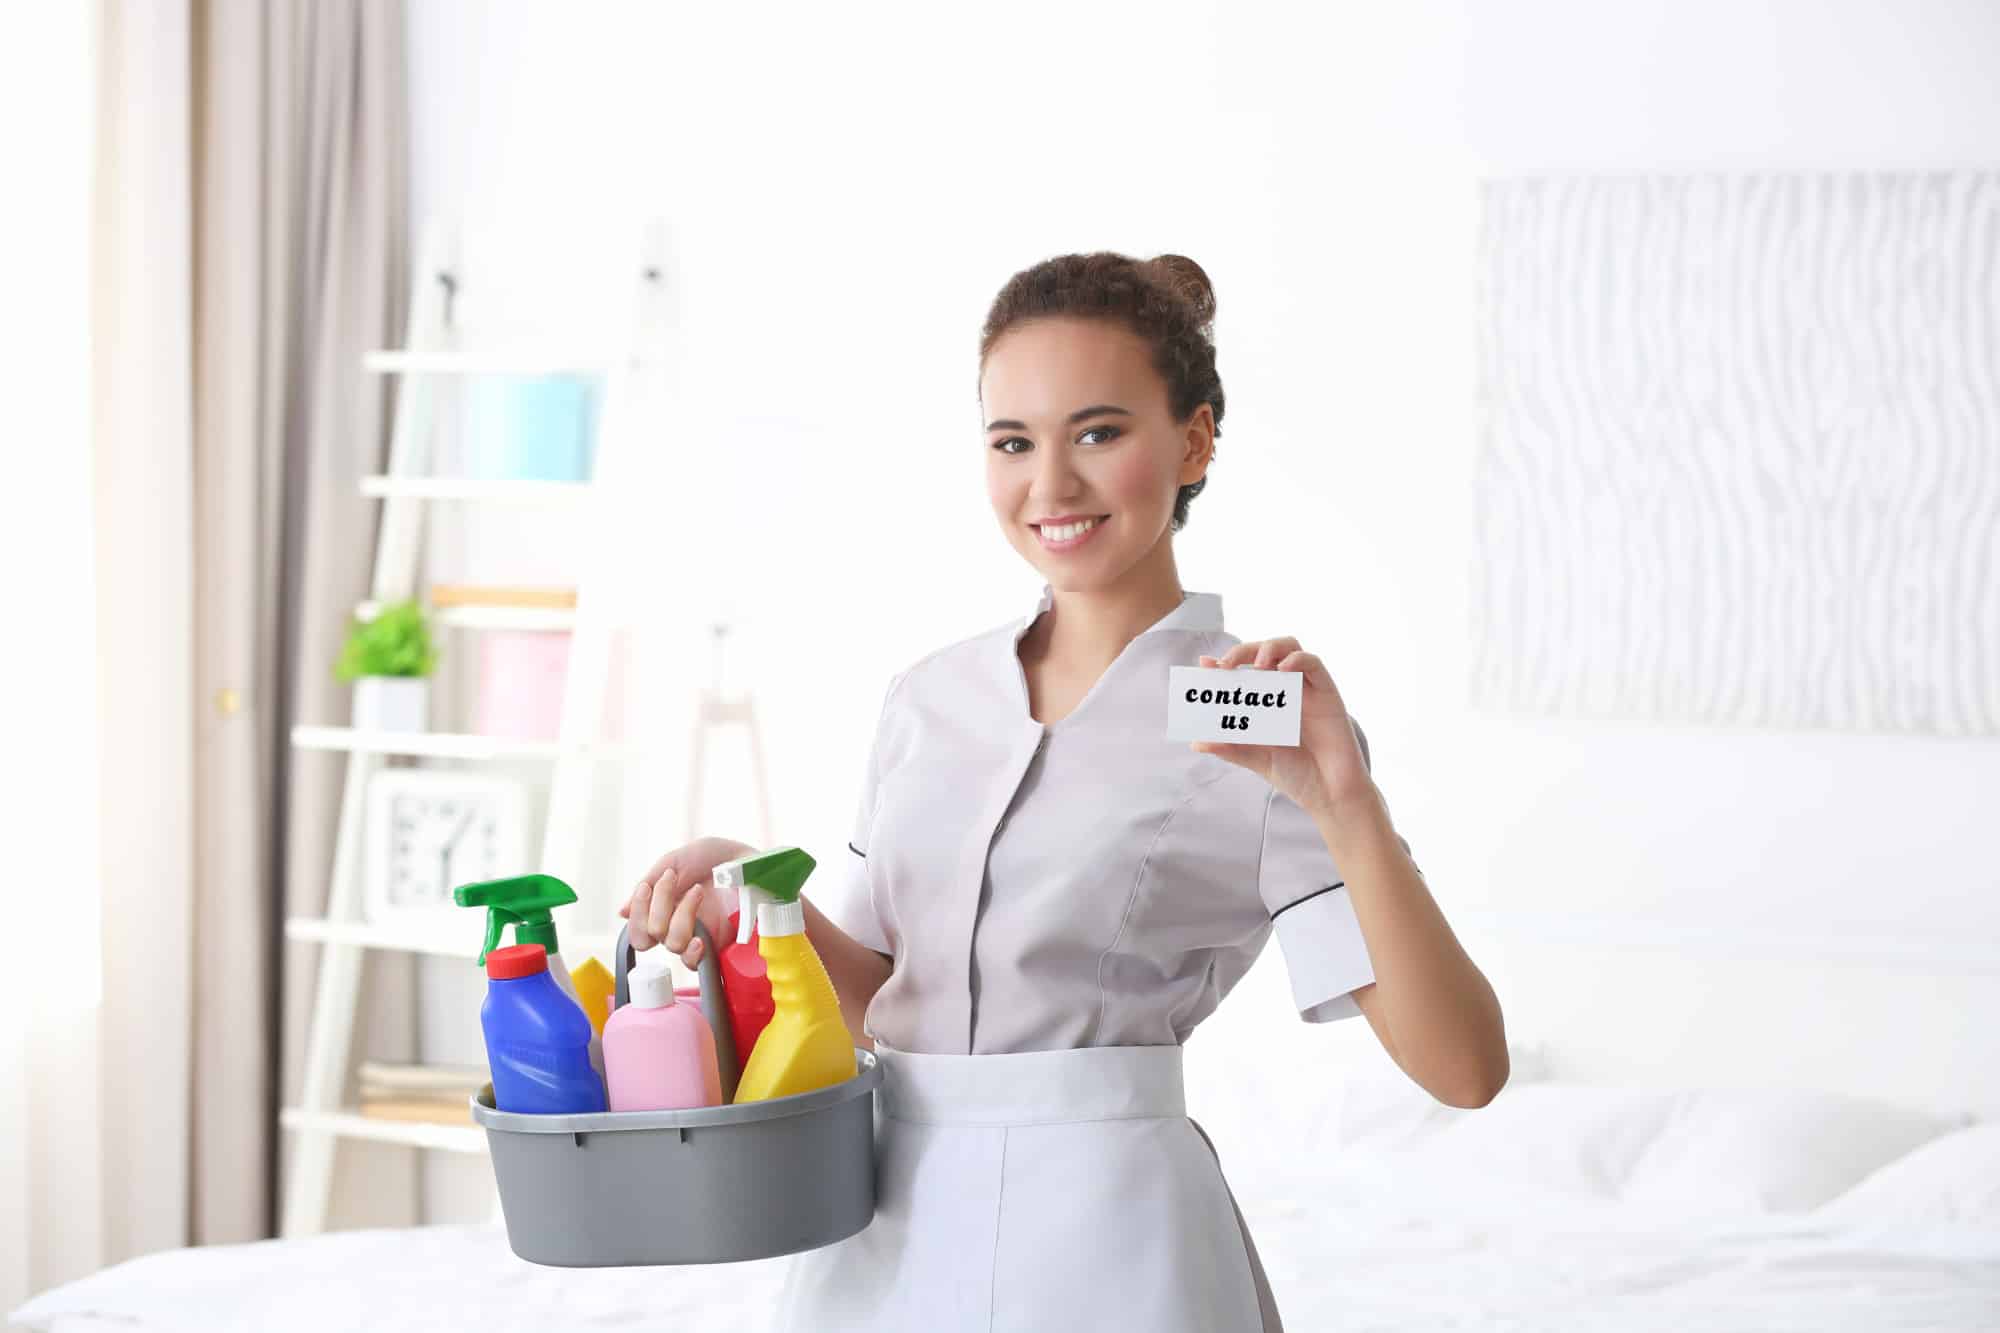 Daily Delight: The Joys and Challenges of Being a Housekeeper